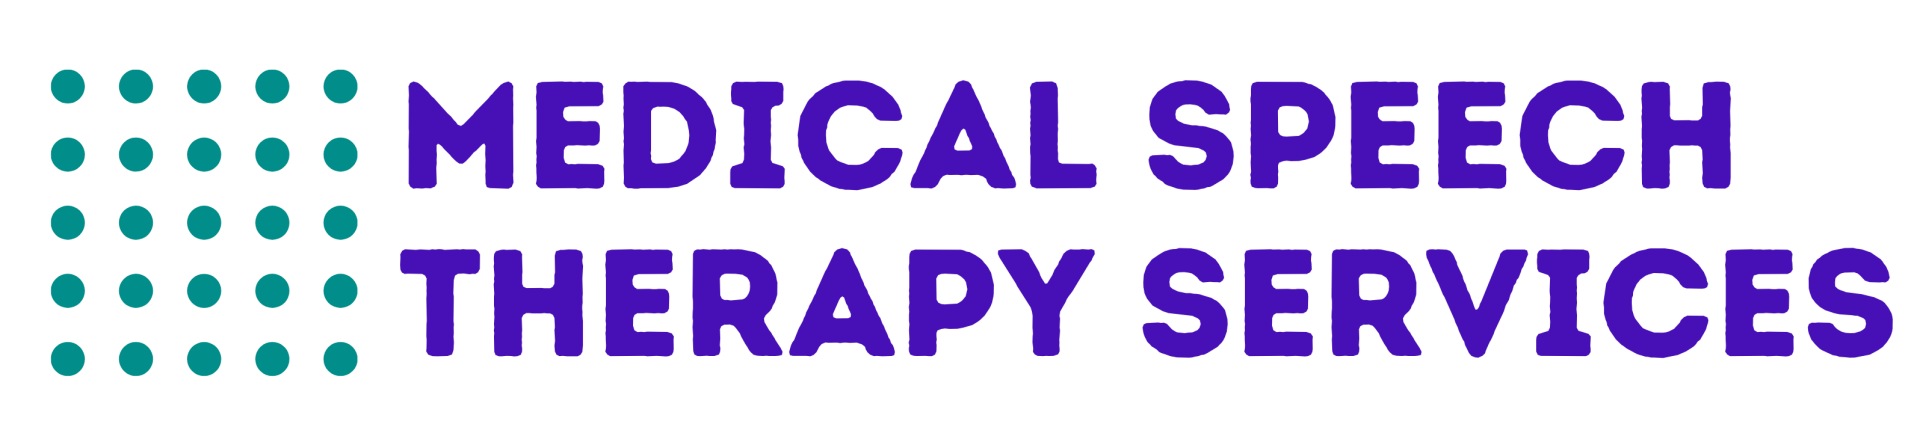 Medical Speech Therapy Services logo